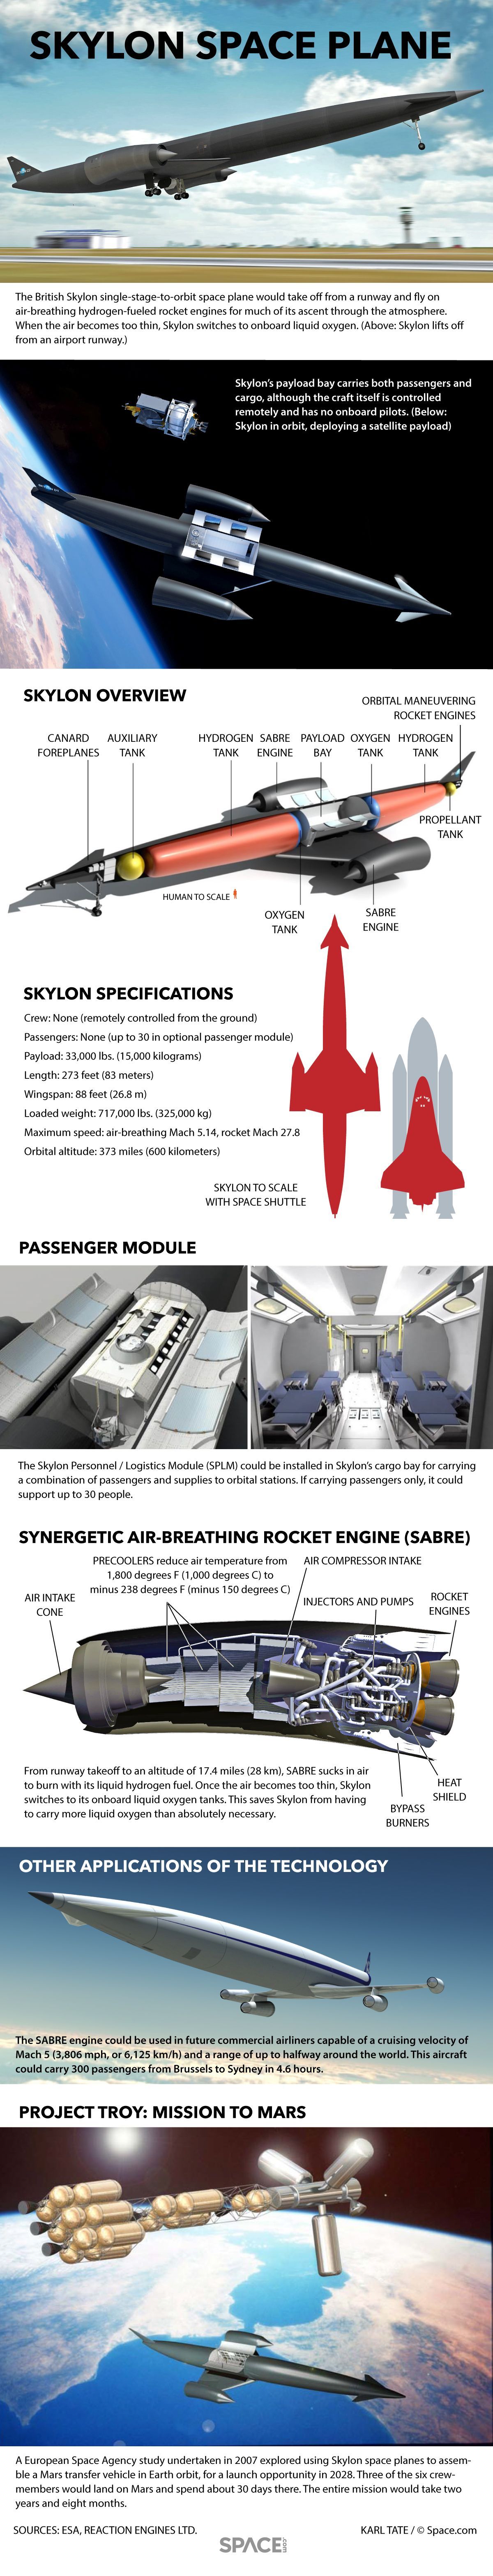 How the British Skylon Space Plane Works (Infographic) By Karl Tate, Infographics Artist - See more at: www.space.com/...